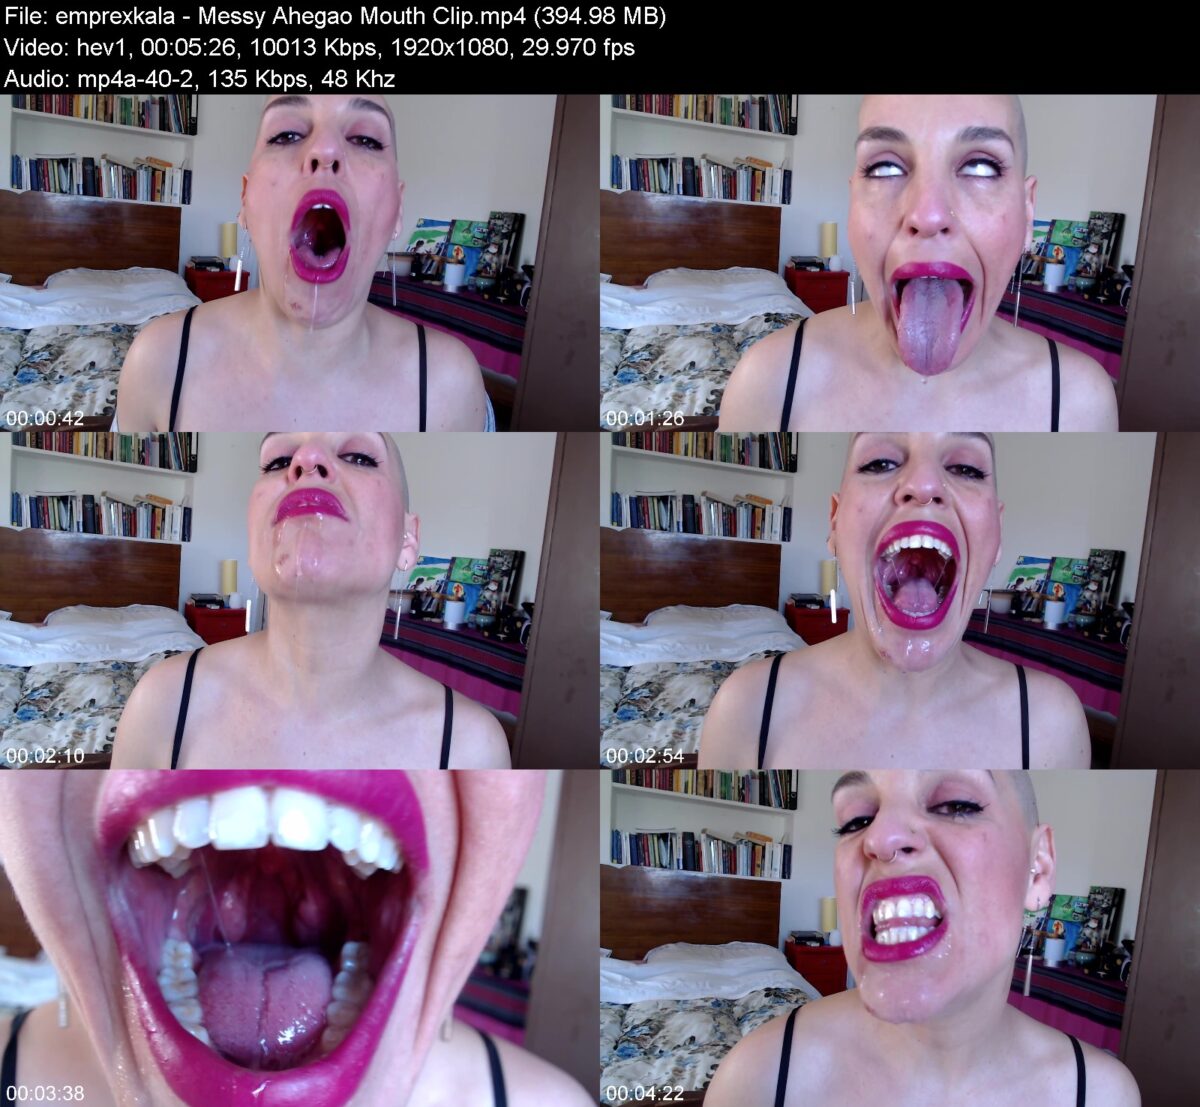 Actress: emprexkala. Title and Studio: Messy Ahegao Mouth Clip